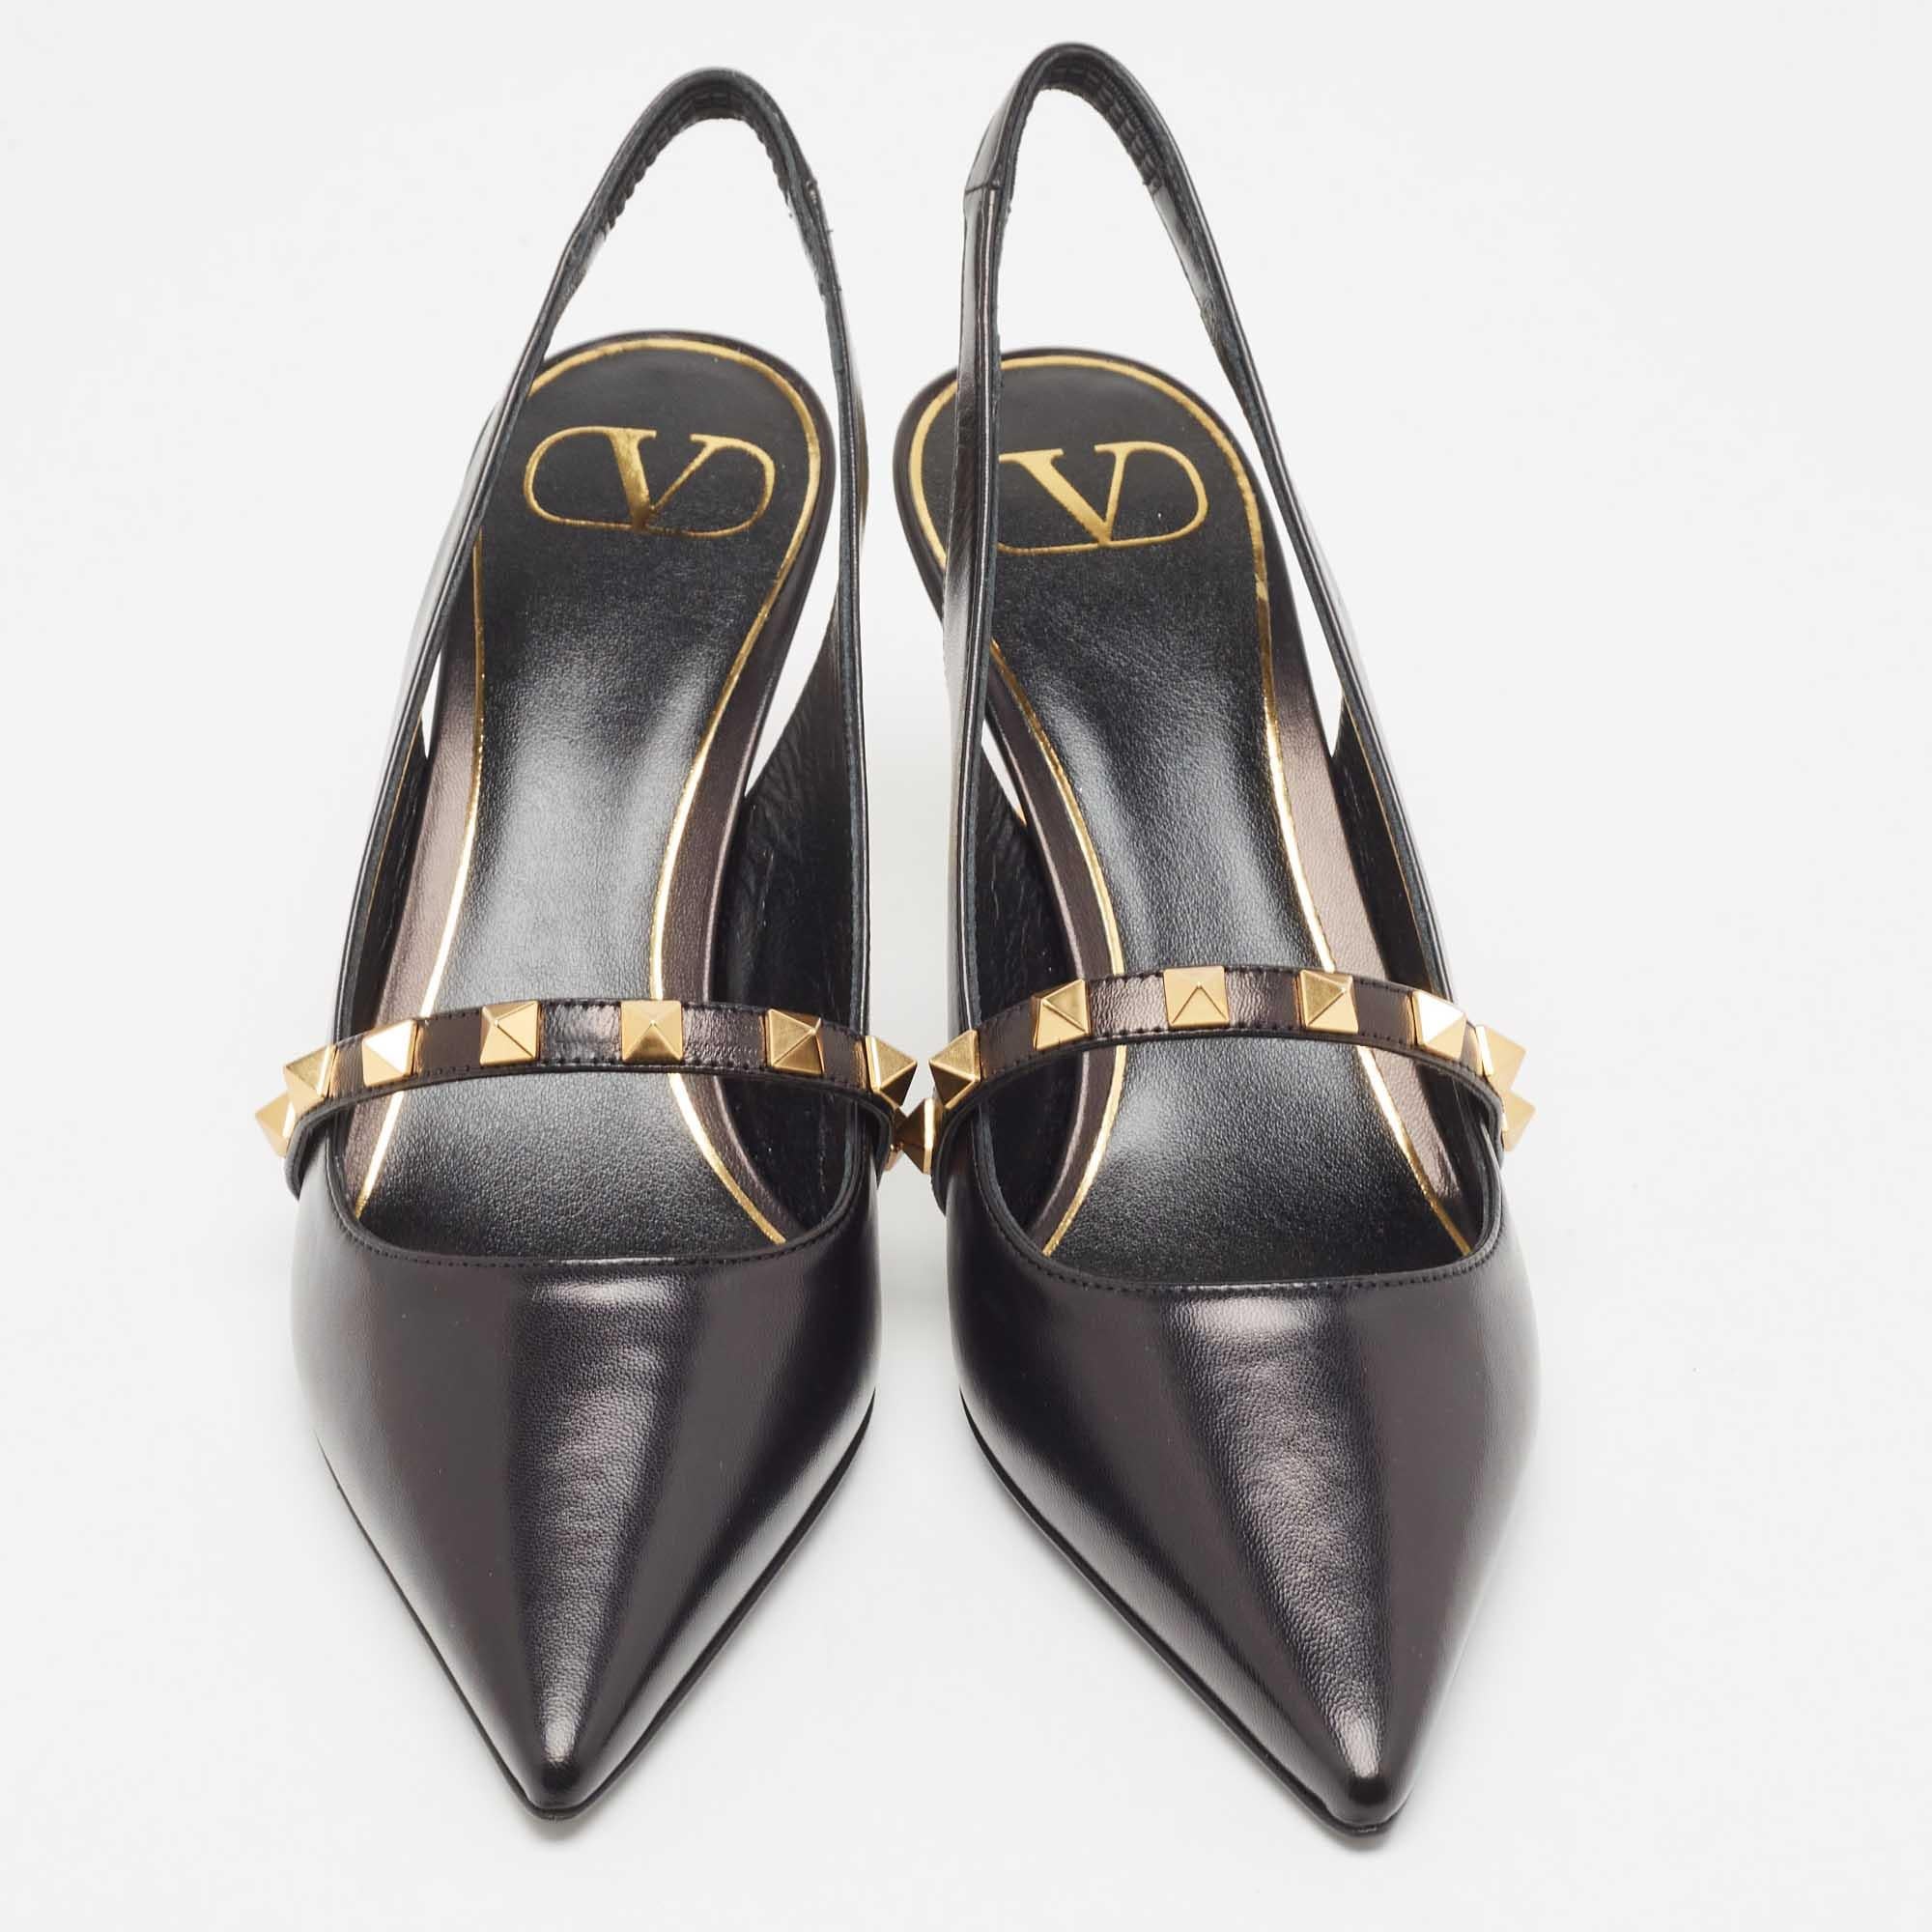 Discover footwear elegance with these Valentino women's pumps. Meticulously designed, these heels seamlessly marry fashion and comfort, ensuring you shine in every setting.

Includes: Original Box, Info Booklet, Extra Embellishment, Original